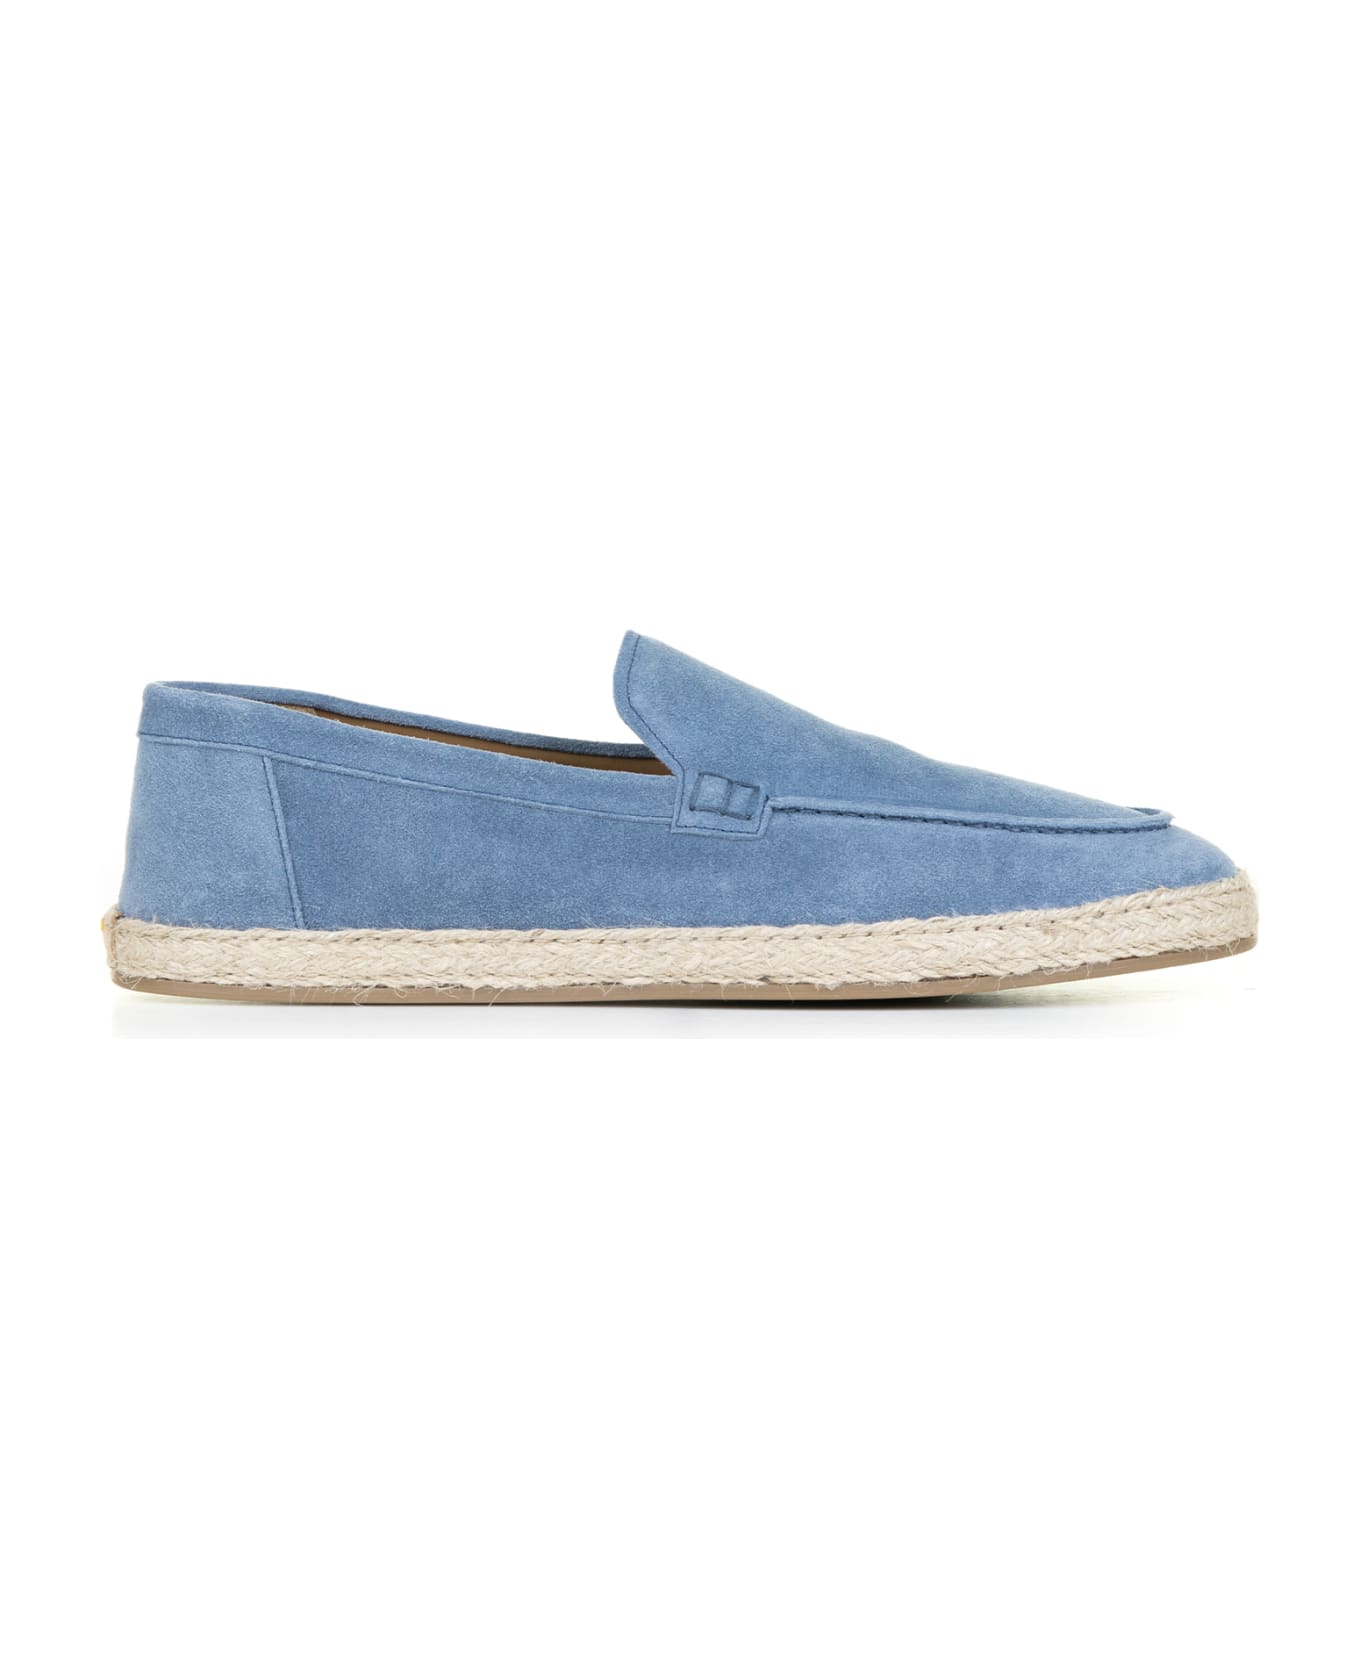 Doucal's Slip On Moccasin In Blue Suede - DENIM